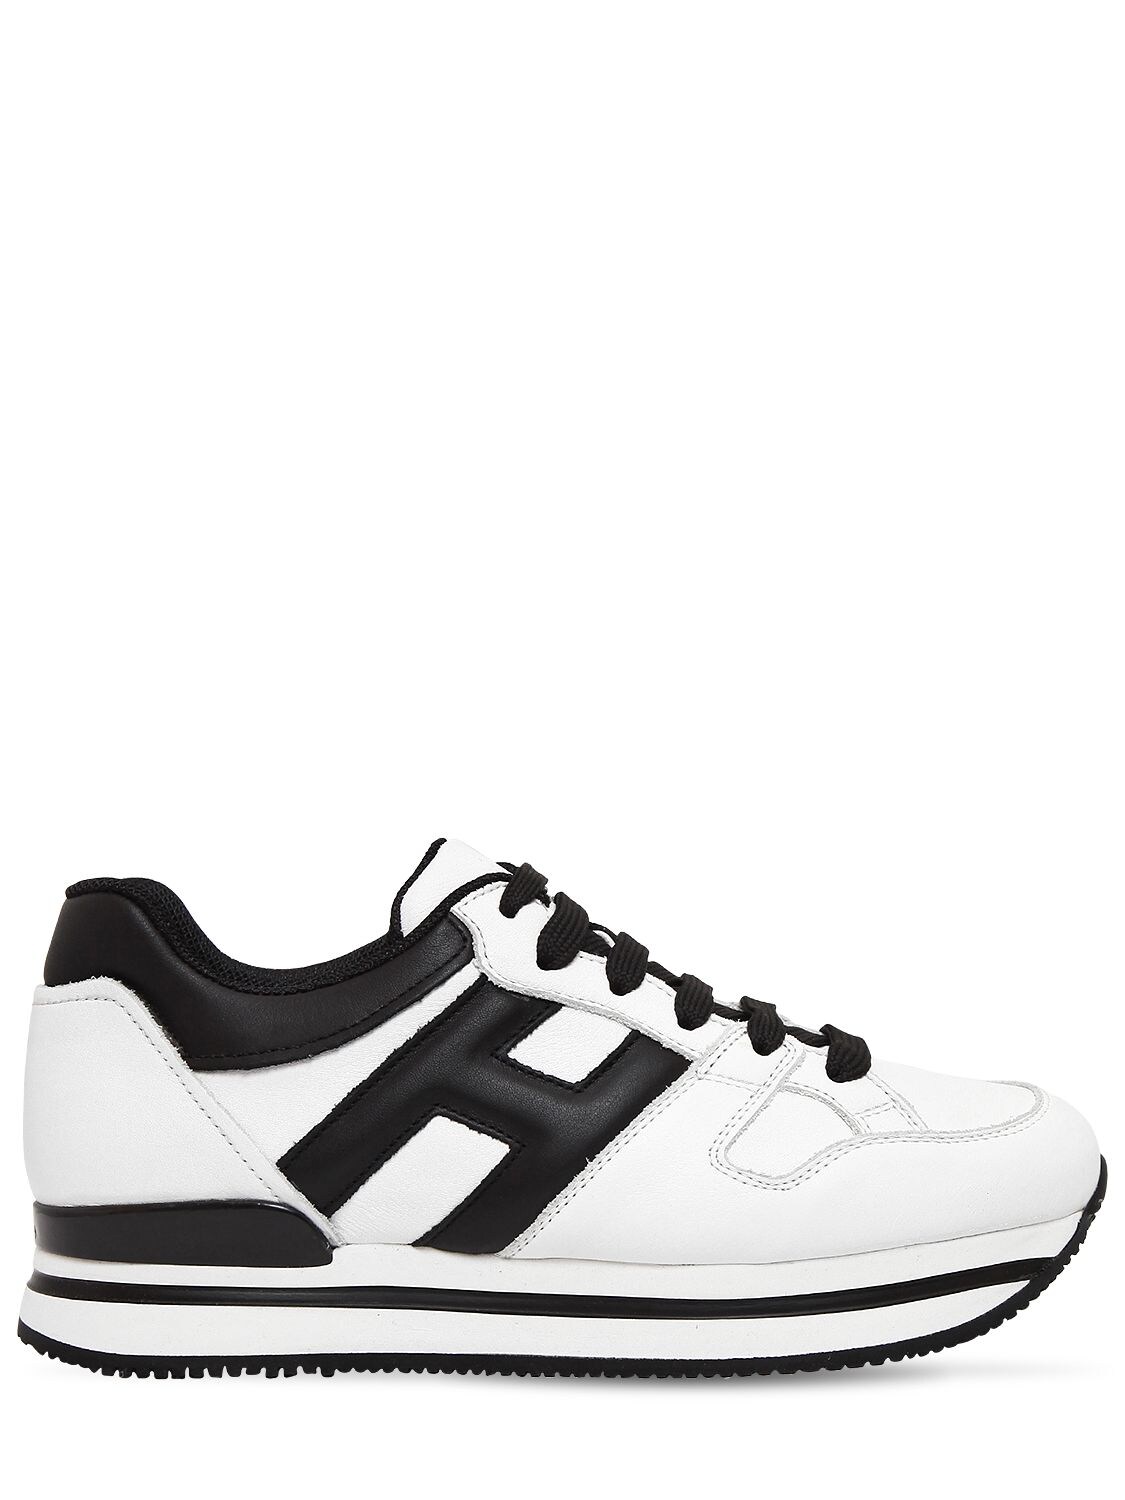 HOGAN 50MM H222 ACTIVE LEATHER SNEAKERS,68I73P016-MDAwMQ2